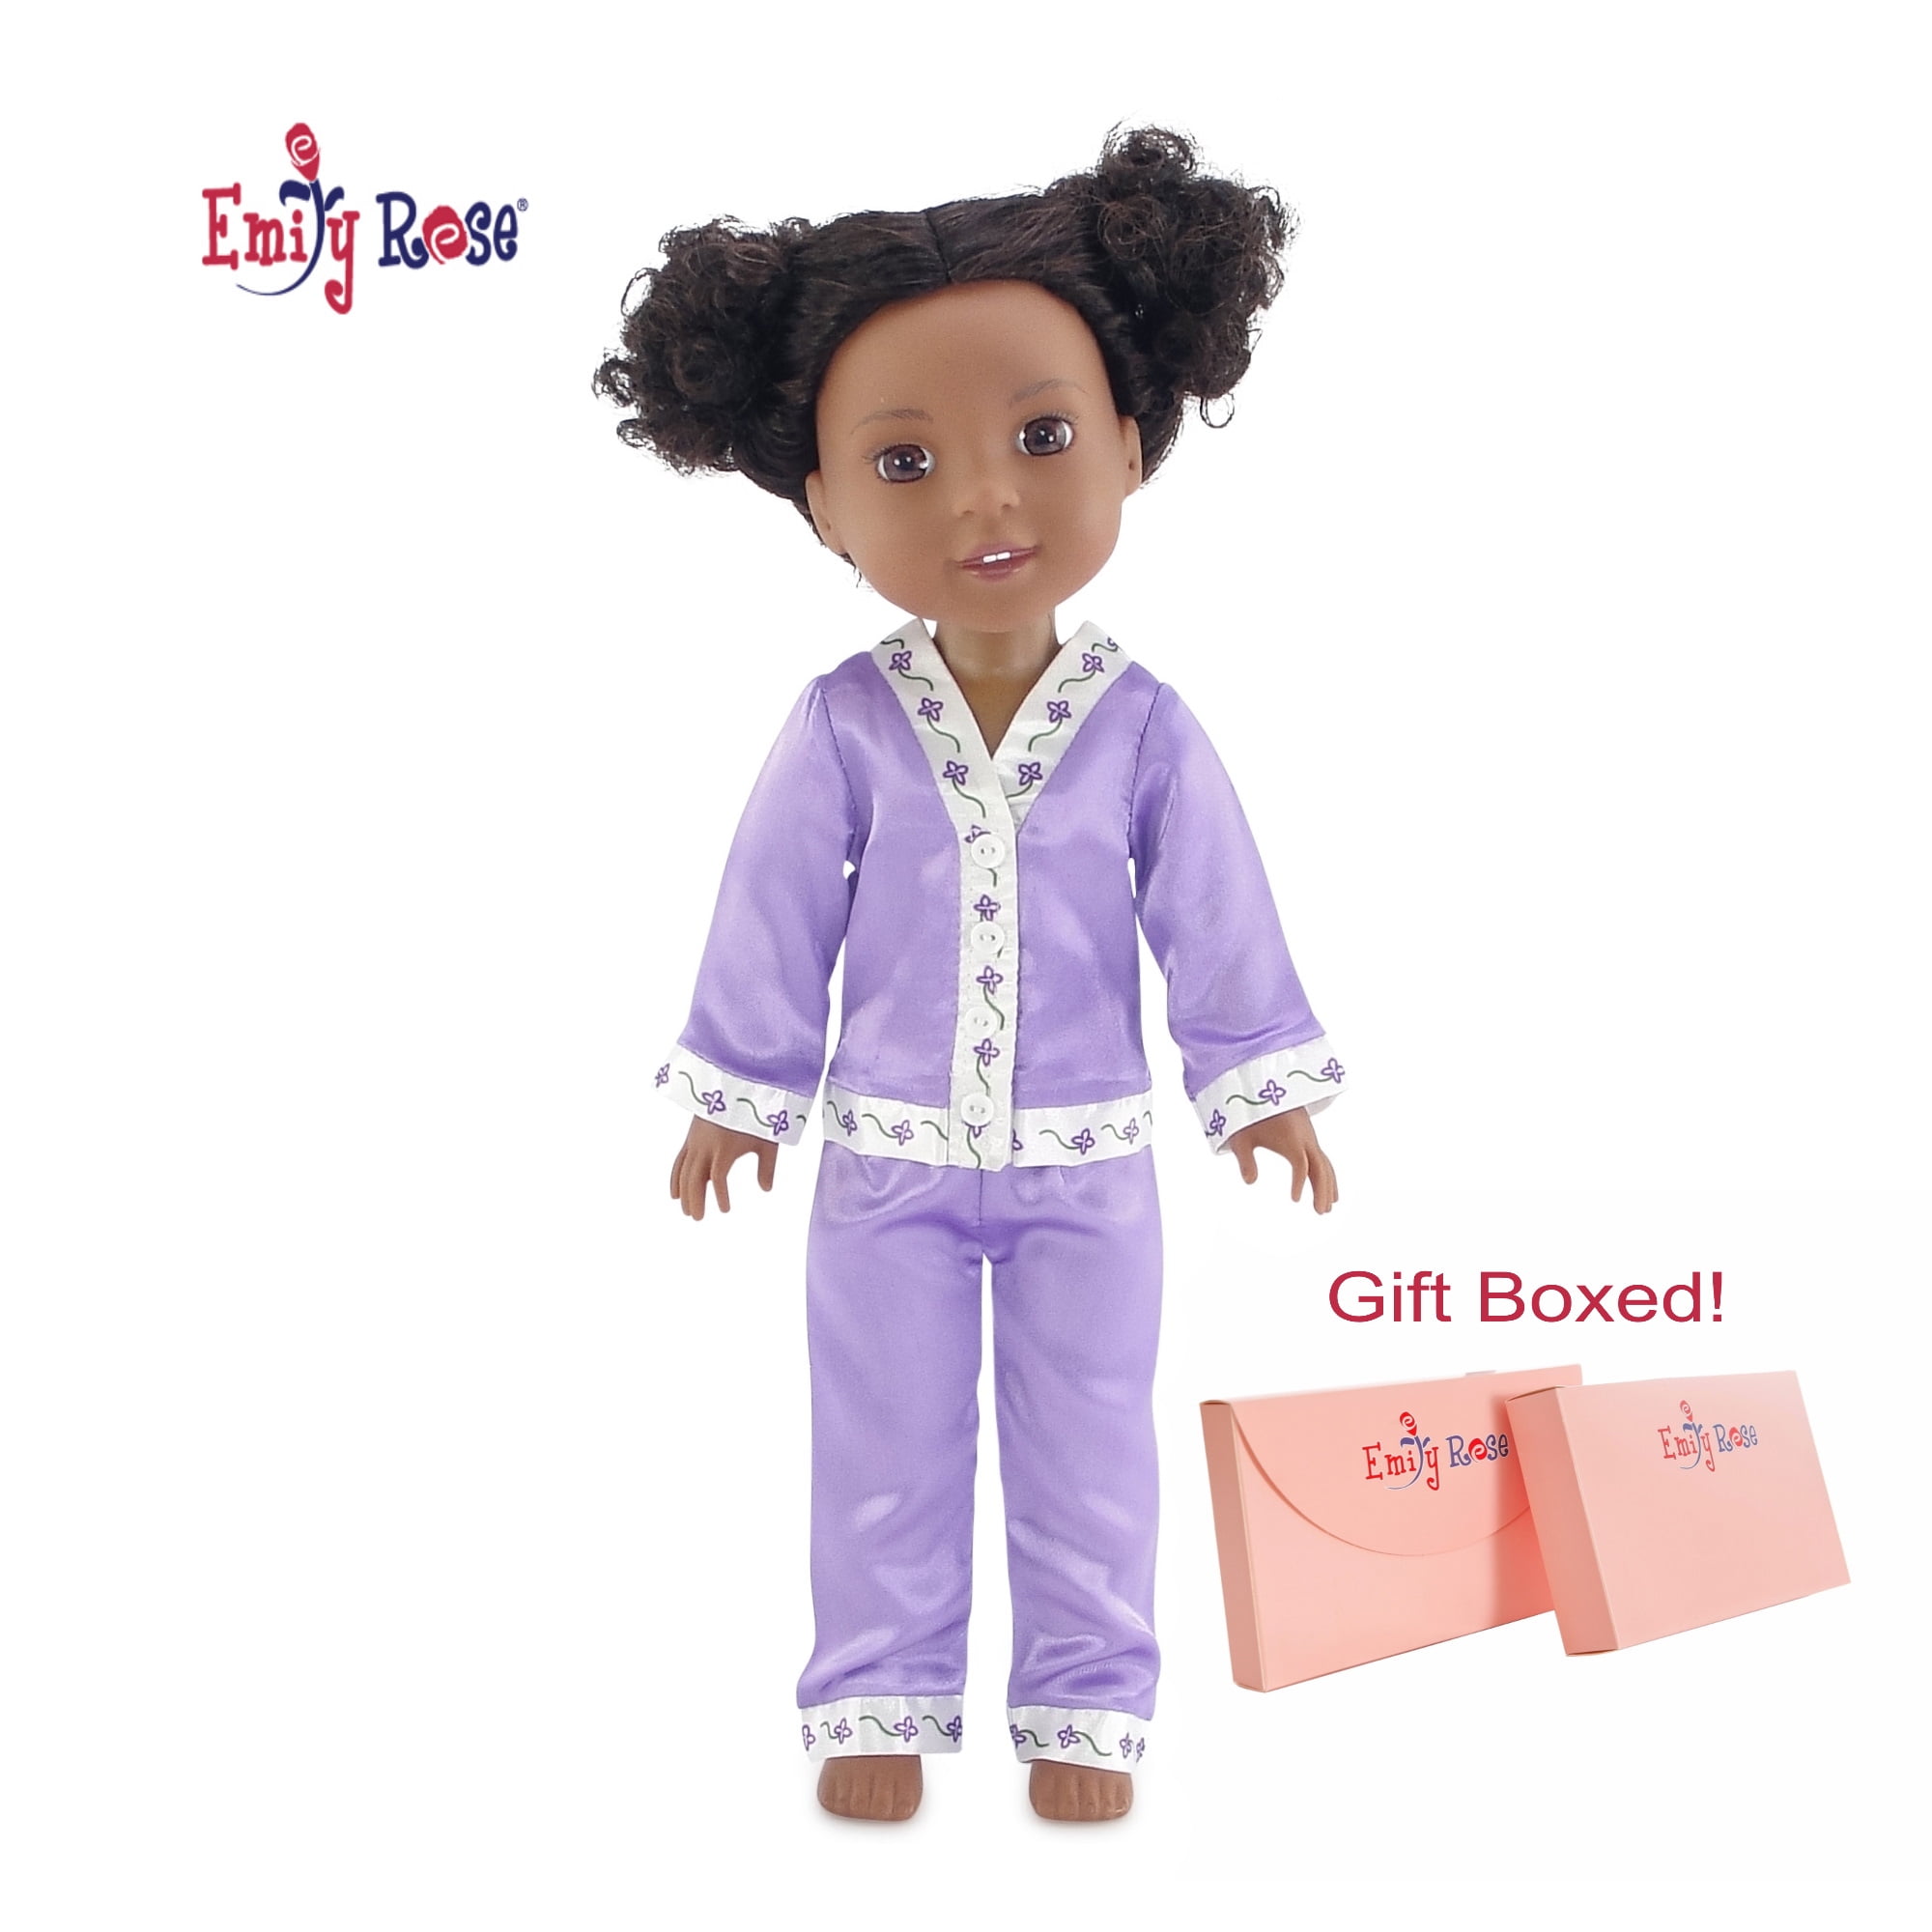 LAVENDER Satin PJ's with Fluffy Slippers PAJAMAS fit 18" American Girl Doll 